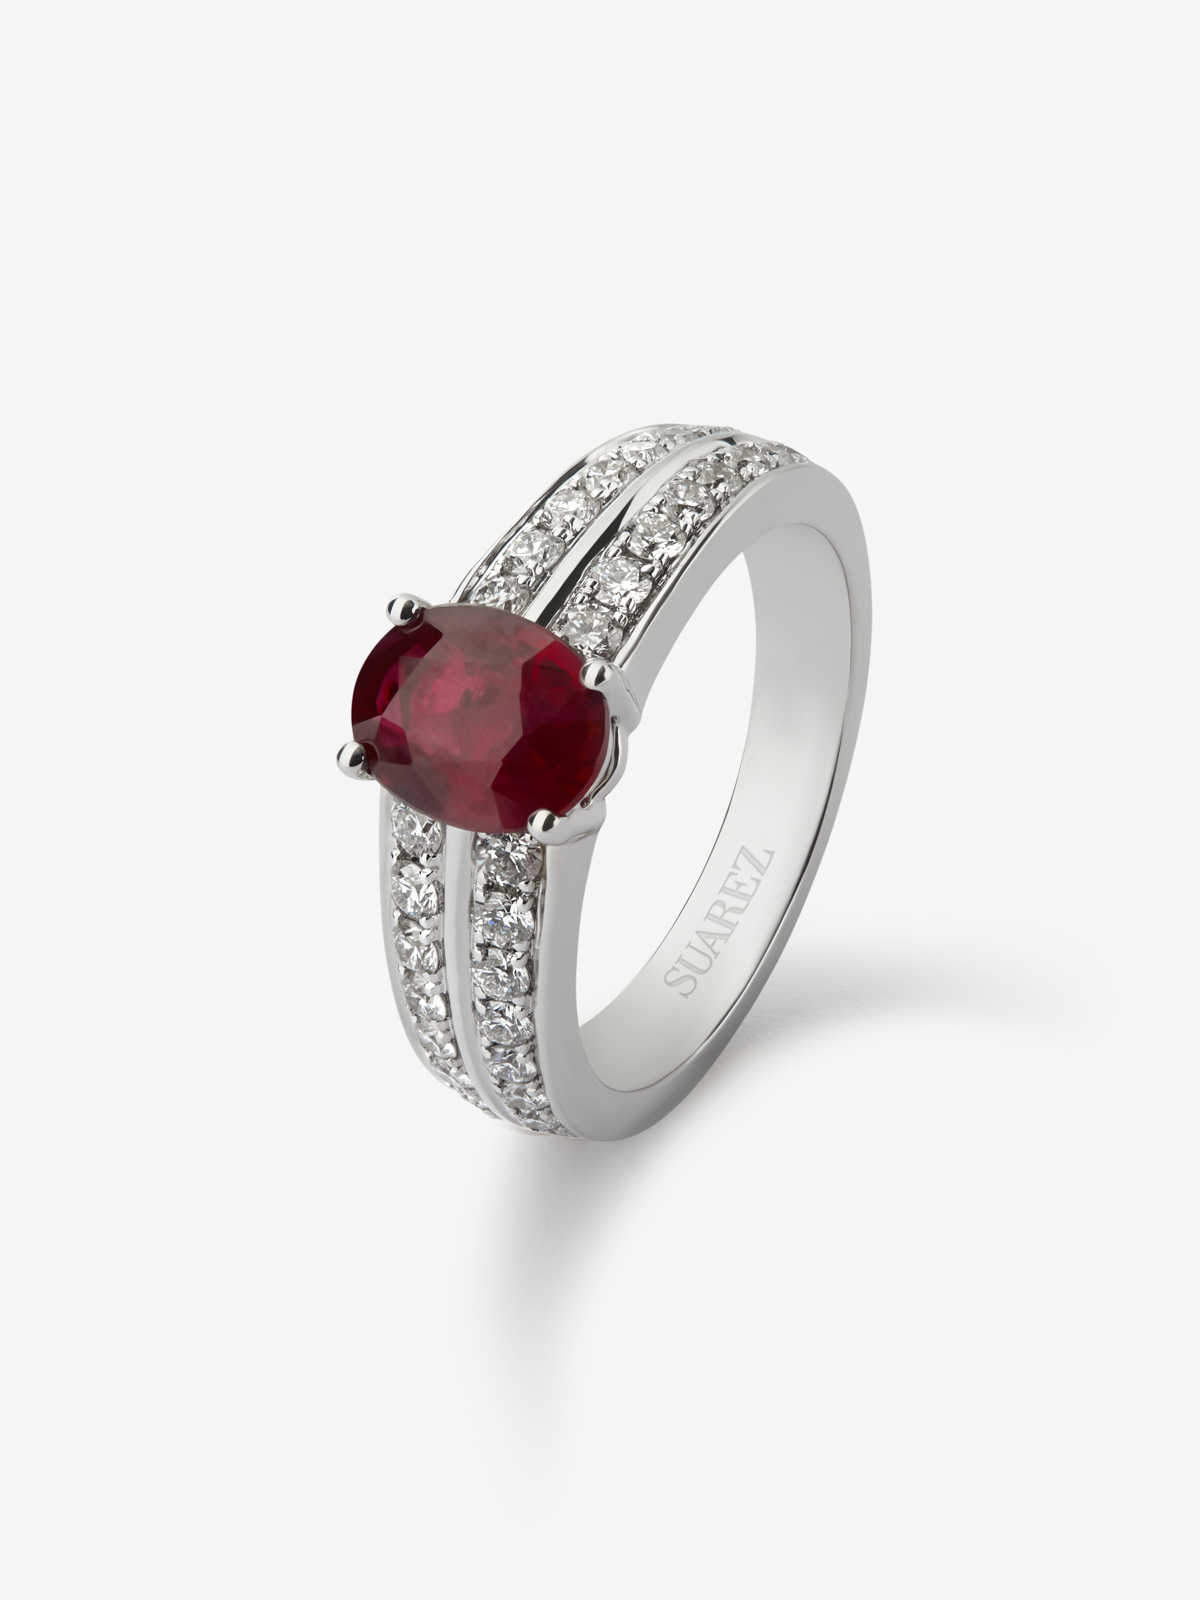 18K white gold ring with oval-cut pigeon blood ruby ​​of 1.489 cts and 32 brilliant-cut diamonds with a total of 0.57 cts